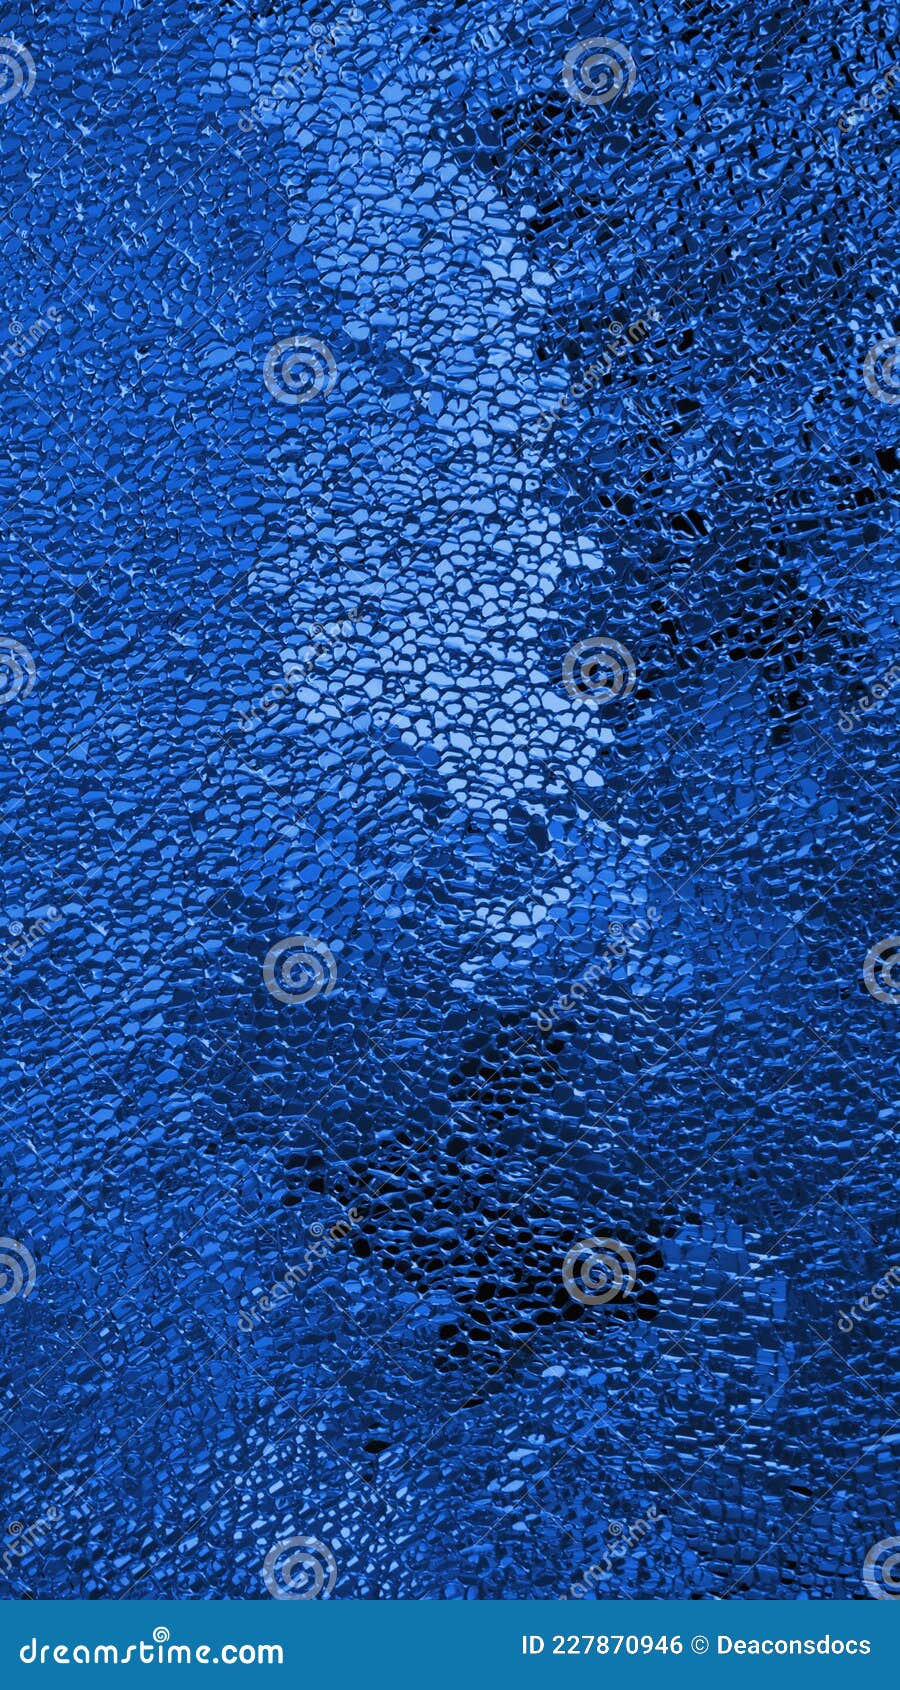 309,435 Royal Blue Background Images, Stock Photos, 3D objects, & Vectors |  Shutterstock